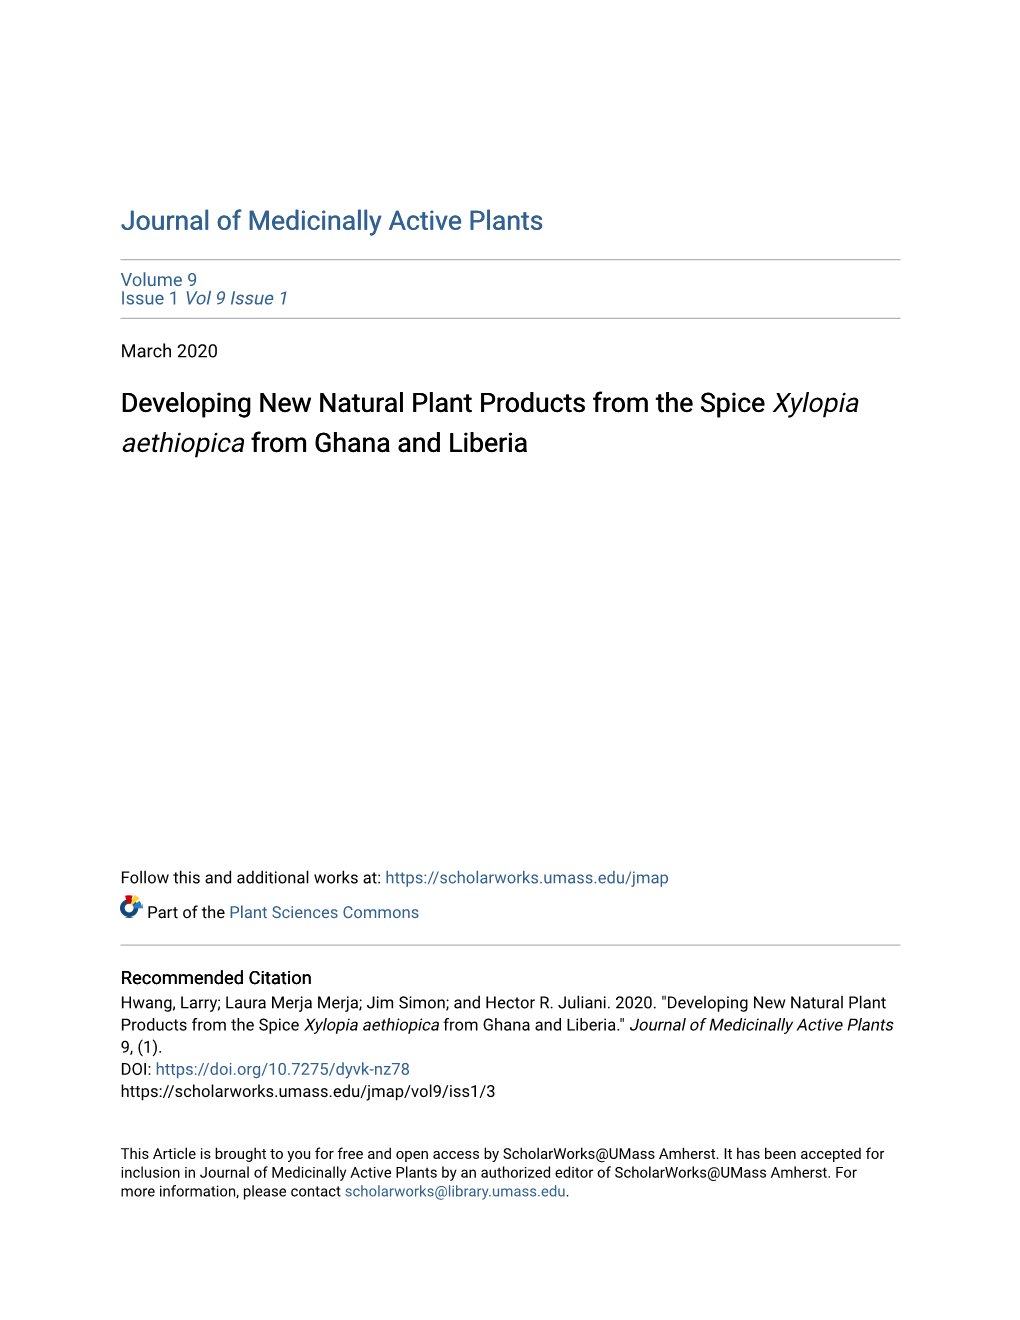 Developing New Natural Plant Products from the Spice Xylopia Aethiopica from Ghana and Liberia